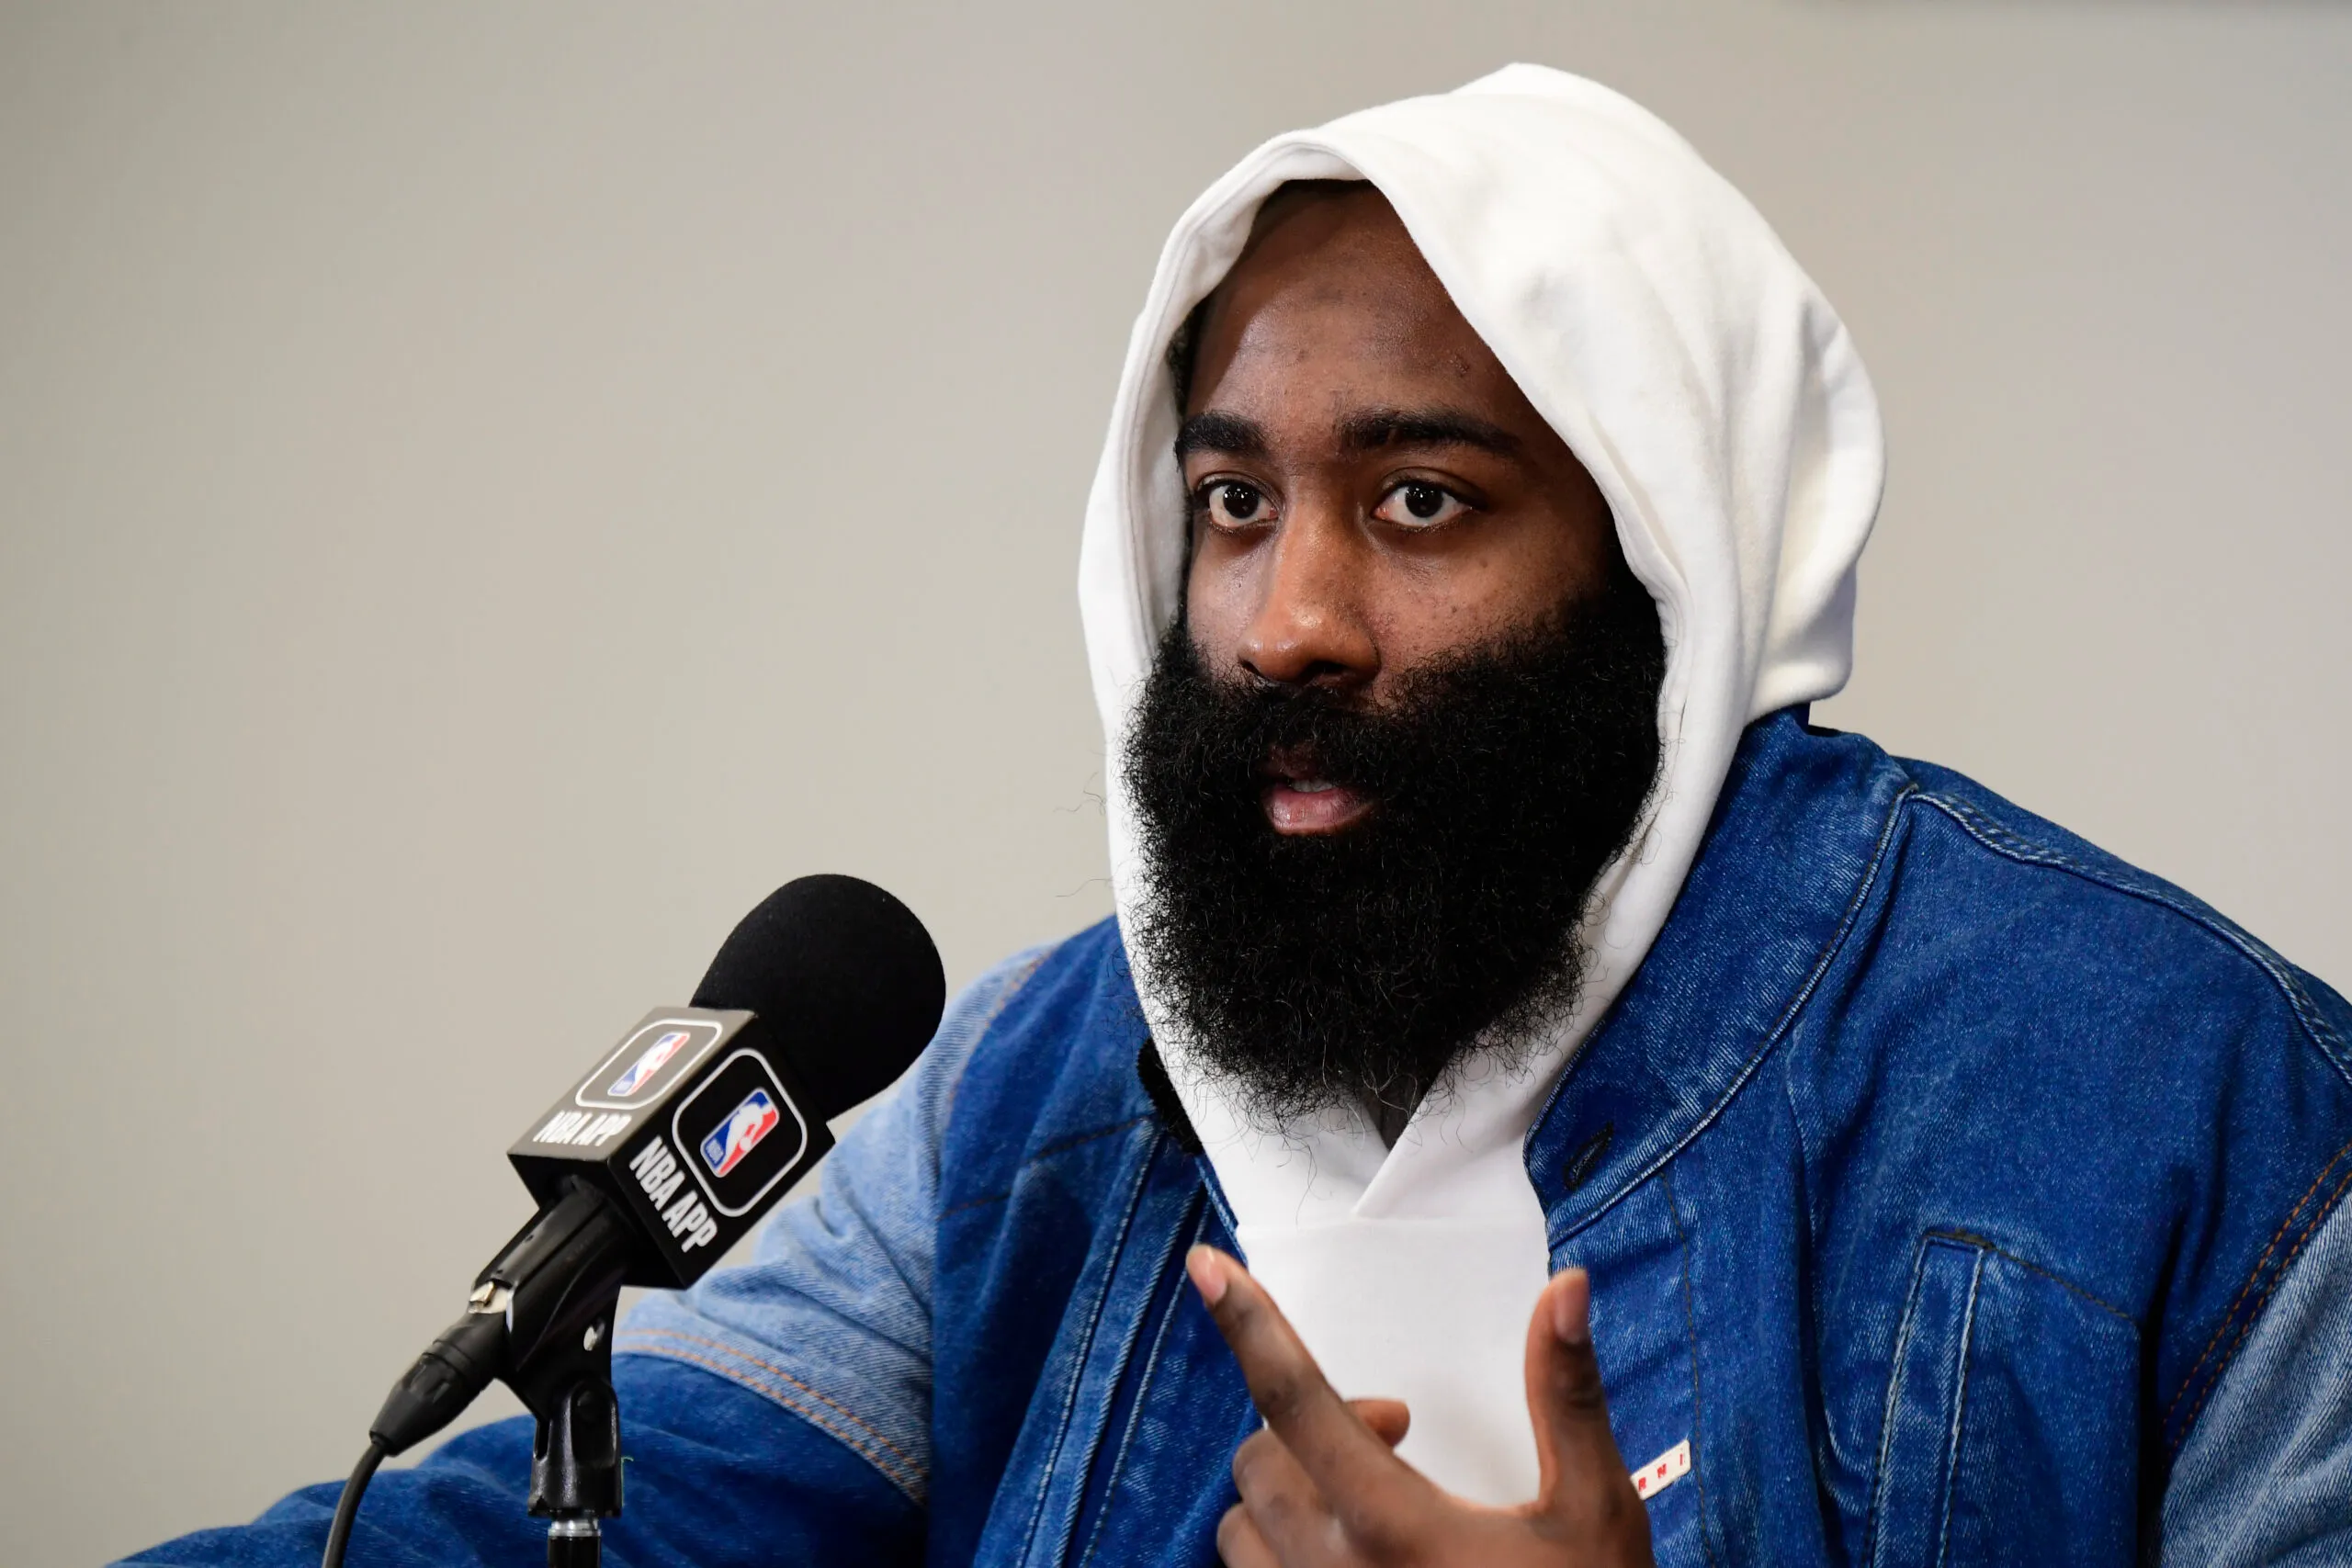 BOSTON, MA - MAY 9: James Harden #1 of the Philadelphia 76ers talks to the media after the game against the Boston Celtics during the Eastern Conference Semi Finals of the 2023 NBA Playoffs on May 9, 2023 at the TD Garden in Boston, Massachusetts. NOTE TO USER: User expressly acknowledges and agrees that, by downloading and or using this photograph, User is consenting to the terms and conditions of the Getty Images License Agreement. Mandatory Copyright Notice: Copyright 2023 NBAE  (Photo by Brian Babineau/NBAE via Getty Images)